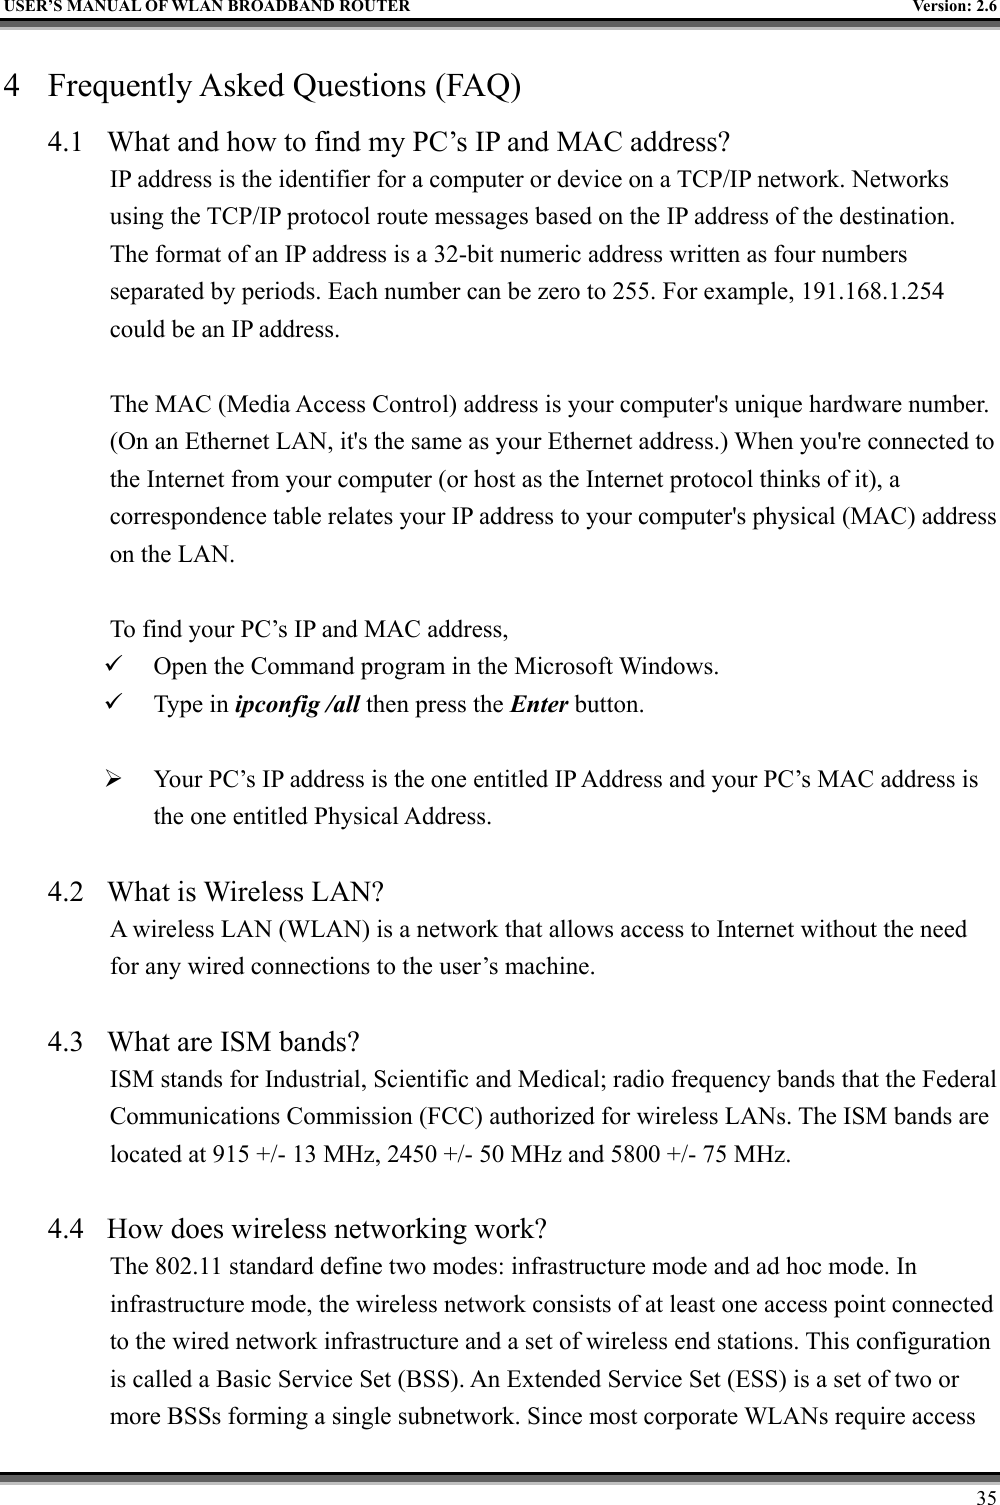   USER’S MANUAL OF WLAN BROADBAND ROUTER    Version: 2.6     35 4  Frequently Asked Questions (FAQ) 4.1  What and how to find my PC’s IP and MAC address? IP address is the identifier for a computer or device on a TCP/IP network. Networks using the TCP/IP protocol route messages based on the IP address of the destination. The format of an IP address is a 32-bit numeric address written as four numbers separated by periods. Each number can be zero to 255. For example, 191.168.1.254 could be an IP address.  The MAC (Media Access Control) address is your computer&apos;s unique hardware number. (On an Ethernet LAN, it&apos;s the same as your Ethernet address.) When you&apos;re connected to the Internet from your computer (or host as the Internet protocol thinks of it), a correspondence table relates your IP address to your computer&apos;s physical (MAC) address on the LAN.  To find your PC’s IP and MAC address,   Open the Command program in the Microsoft Windows.   Type in ipconfig /all then press the Enter button.    Your PC’s IP address is the one entitled IP Address and your PC’s MAC address is the one entitled Physical Address.  4.2  What is Wireless LAN?   A wireless LAN (WLAN) is a network that allows access to Internet without the need for any wired connections to the user’s machine.    4.3  What are ISM bands?   ISM stands for Industrial, Scientific and Medical; radio frequency bands that the Federal Communications Commission (FCC) authorized for wireless LANs. The ISM bands are located at 915 +/- 13 MHz, 2450 +/- 50 MHz and 5800 +/- 75 MHz.    4.4  How does wireless networking work?   The 802.11 standard define two modes: infrastructure mode and ad hoc mode. In infrastructure mode, the wireless network consists of at least one access point connected to the wired network infrastructure and a set of wireless end stations. This configuration is called a Basic Service Set (BSS). An Extended Service Set (ESS) is a set of two or more BSSs forming a single subnetwork. Since most corporate WLANs require access 